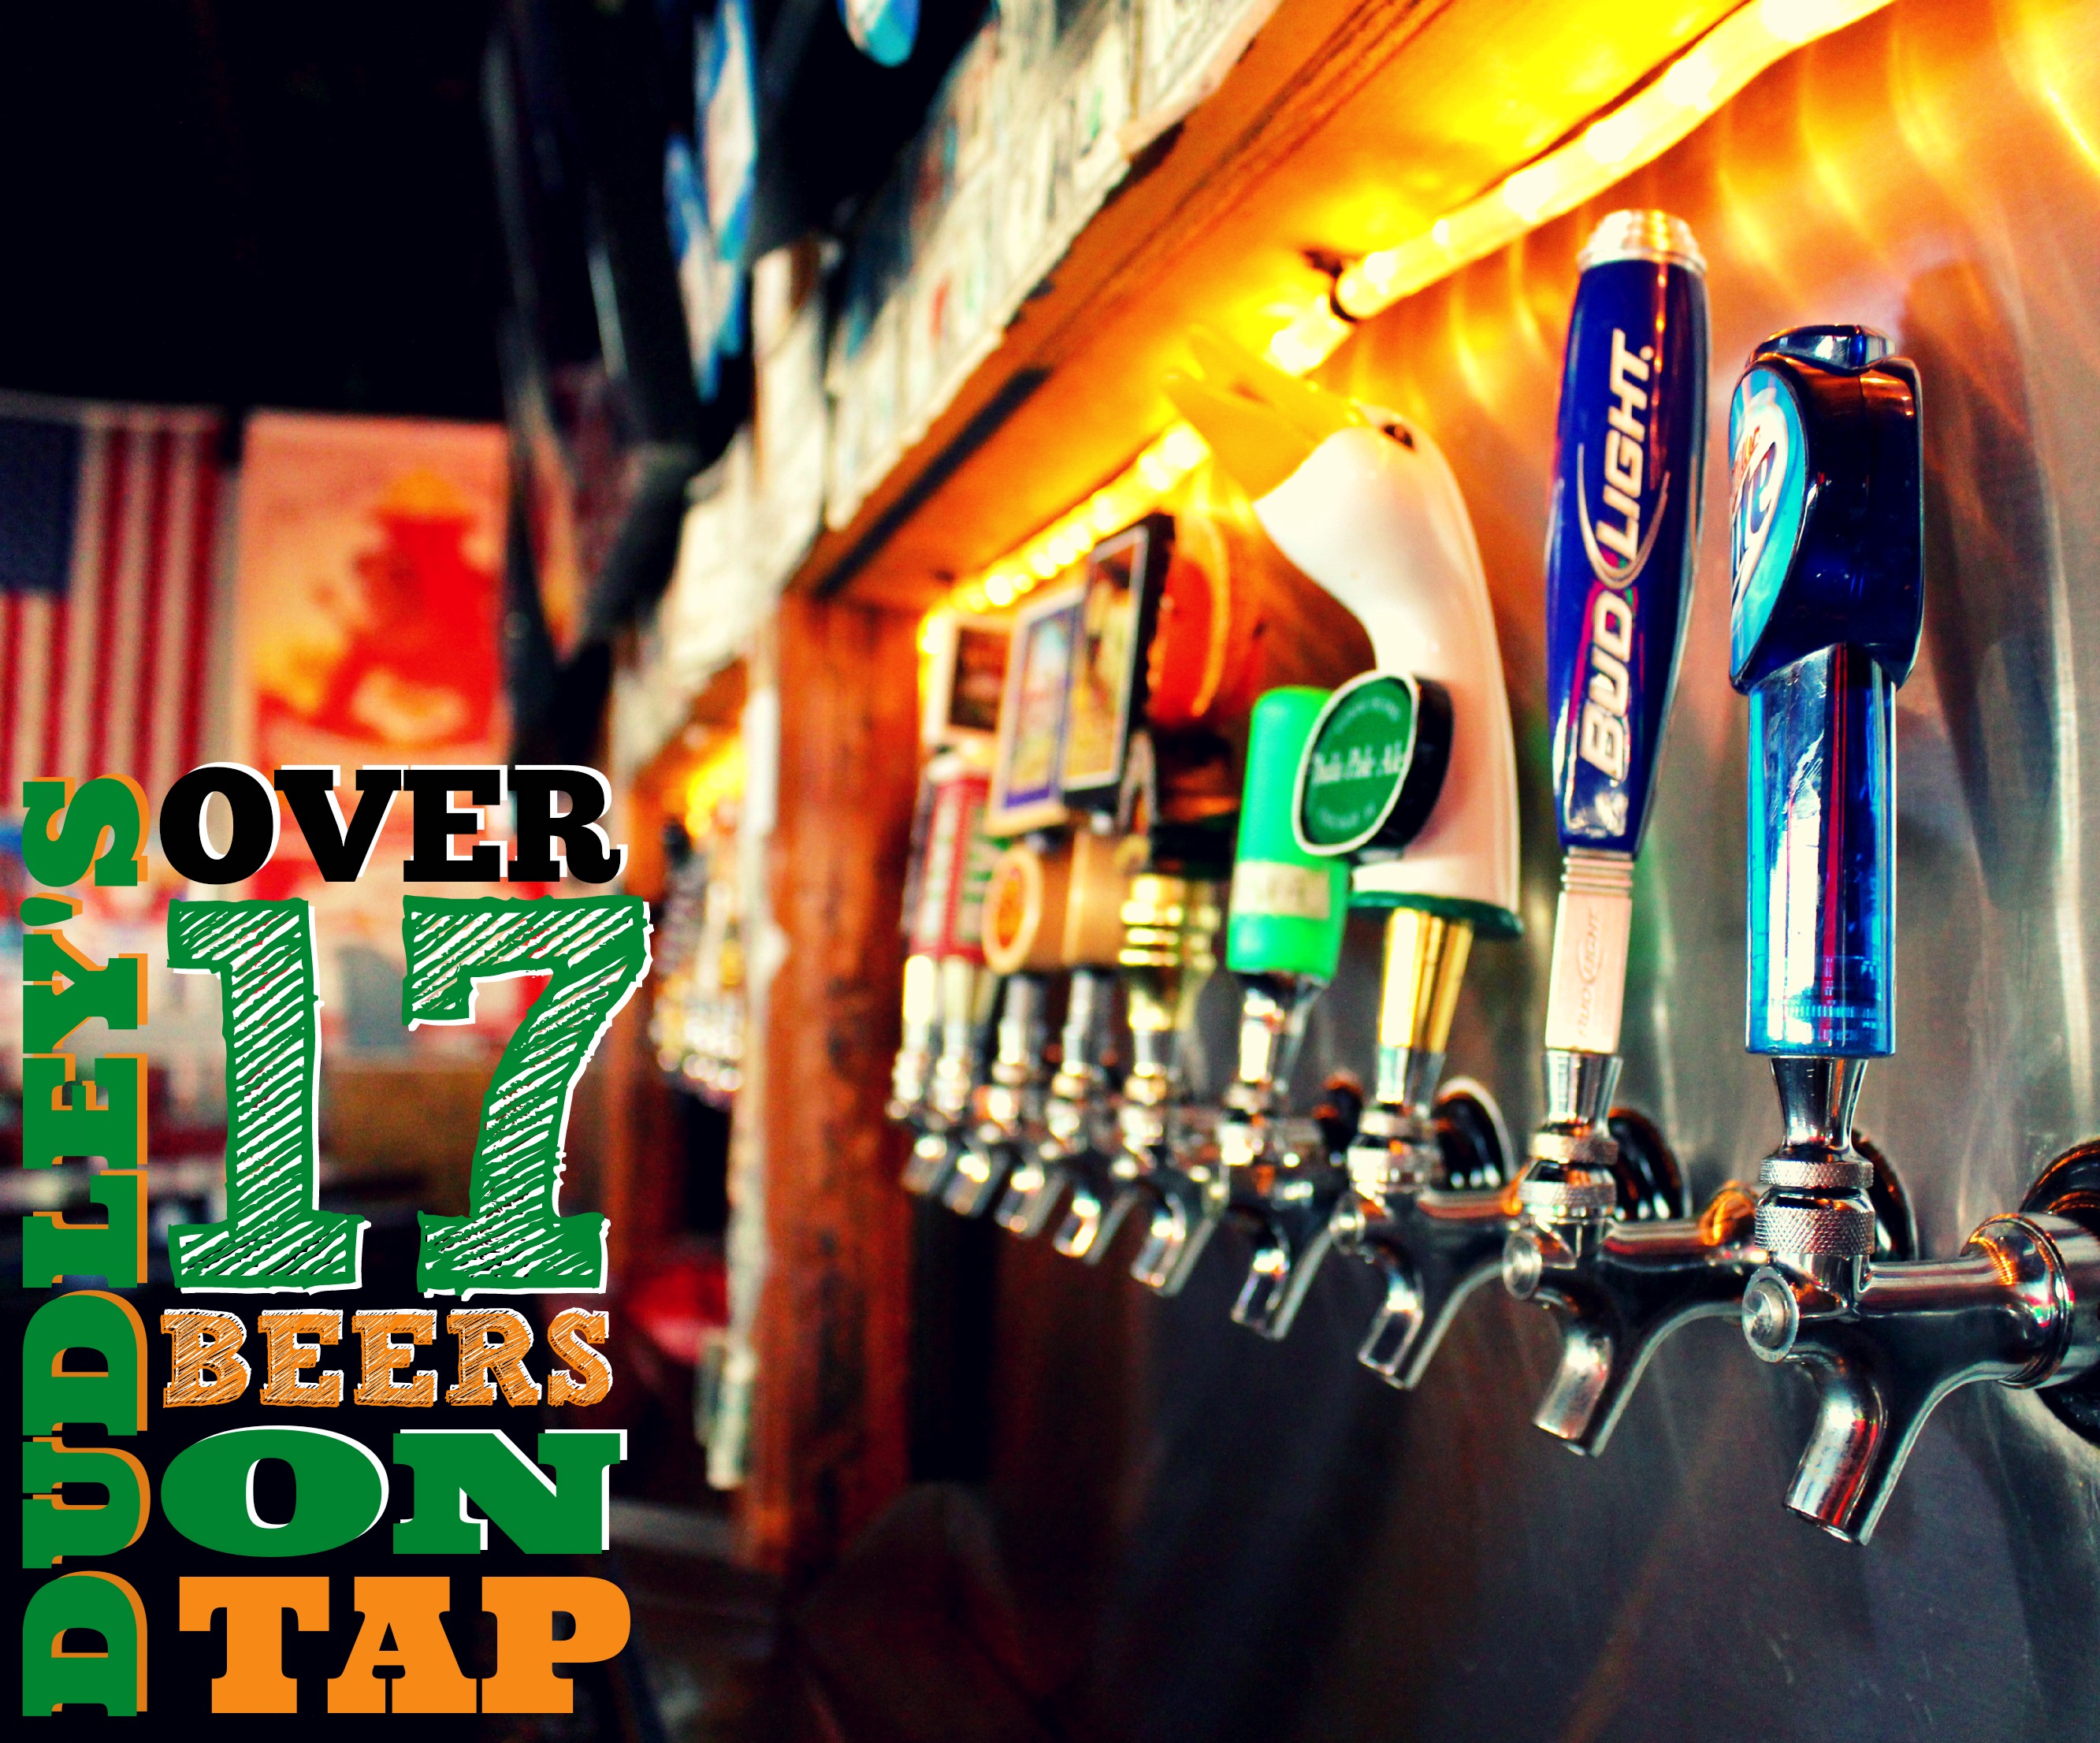 Dudley's has over 17 beers on tap!